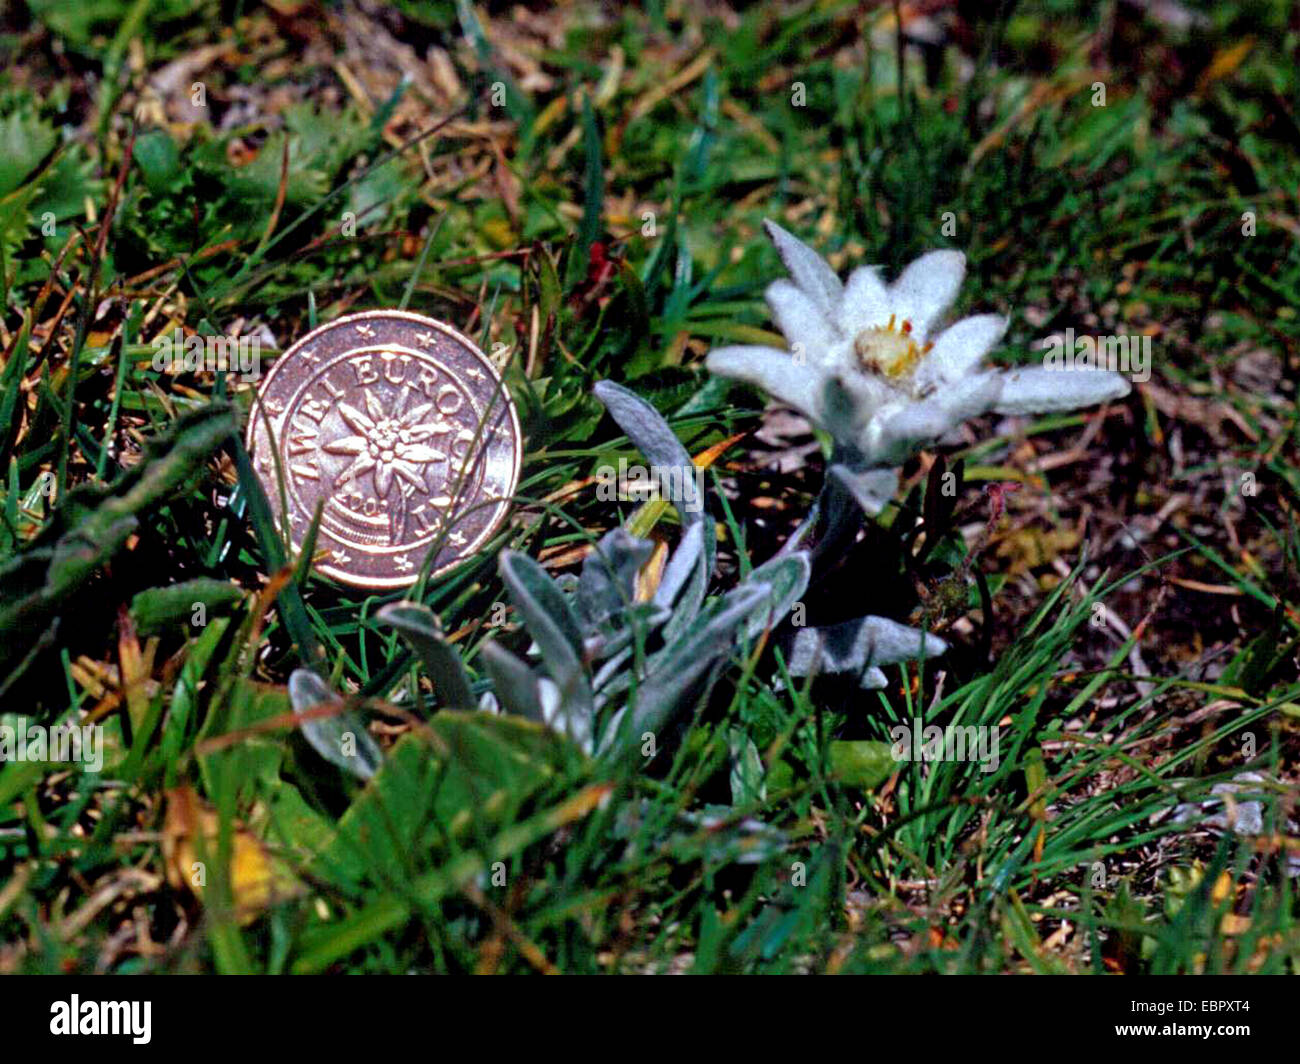 Edelweiss (Leontopodium alpinum, Leontopodium nivale), blooming beside an Austrian 2 Cent coin with edelweiss on it, Austria Stock Photo